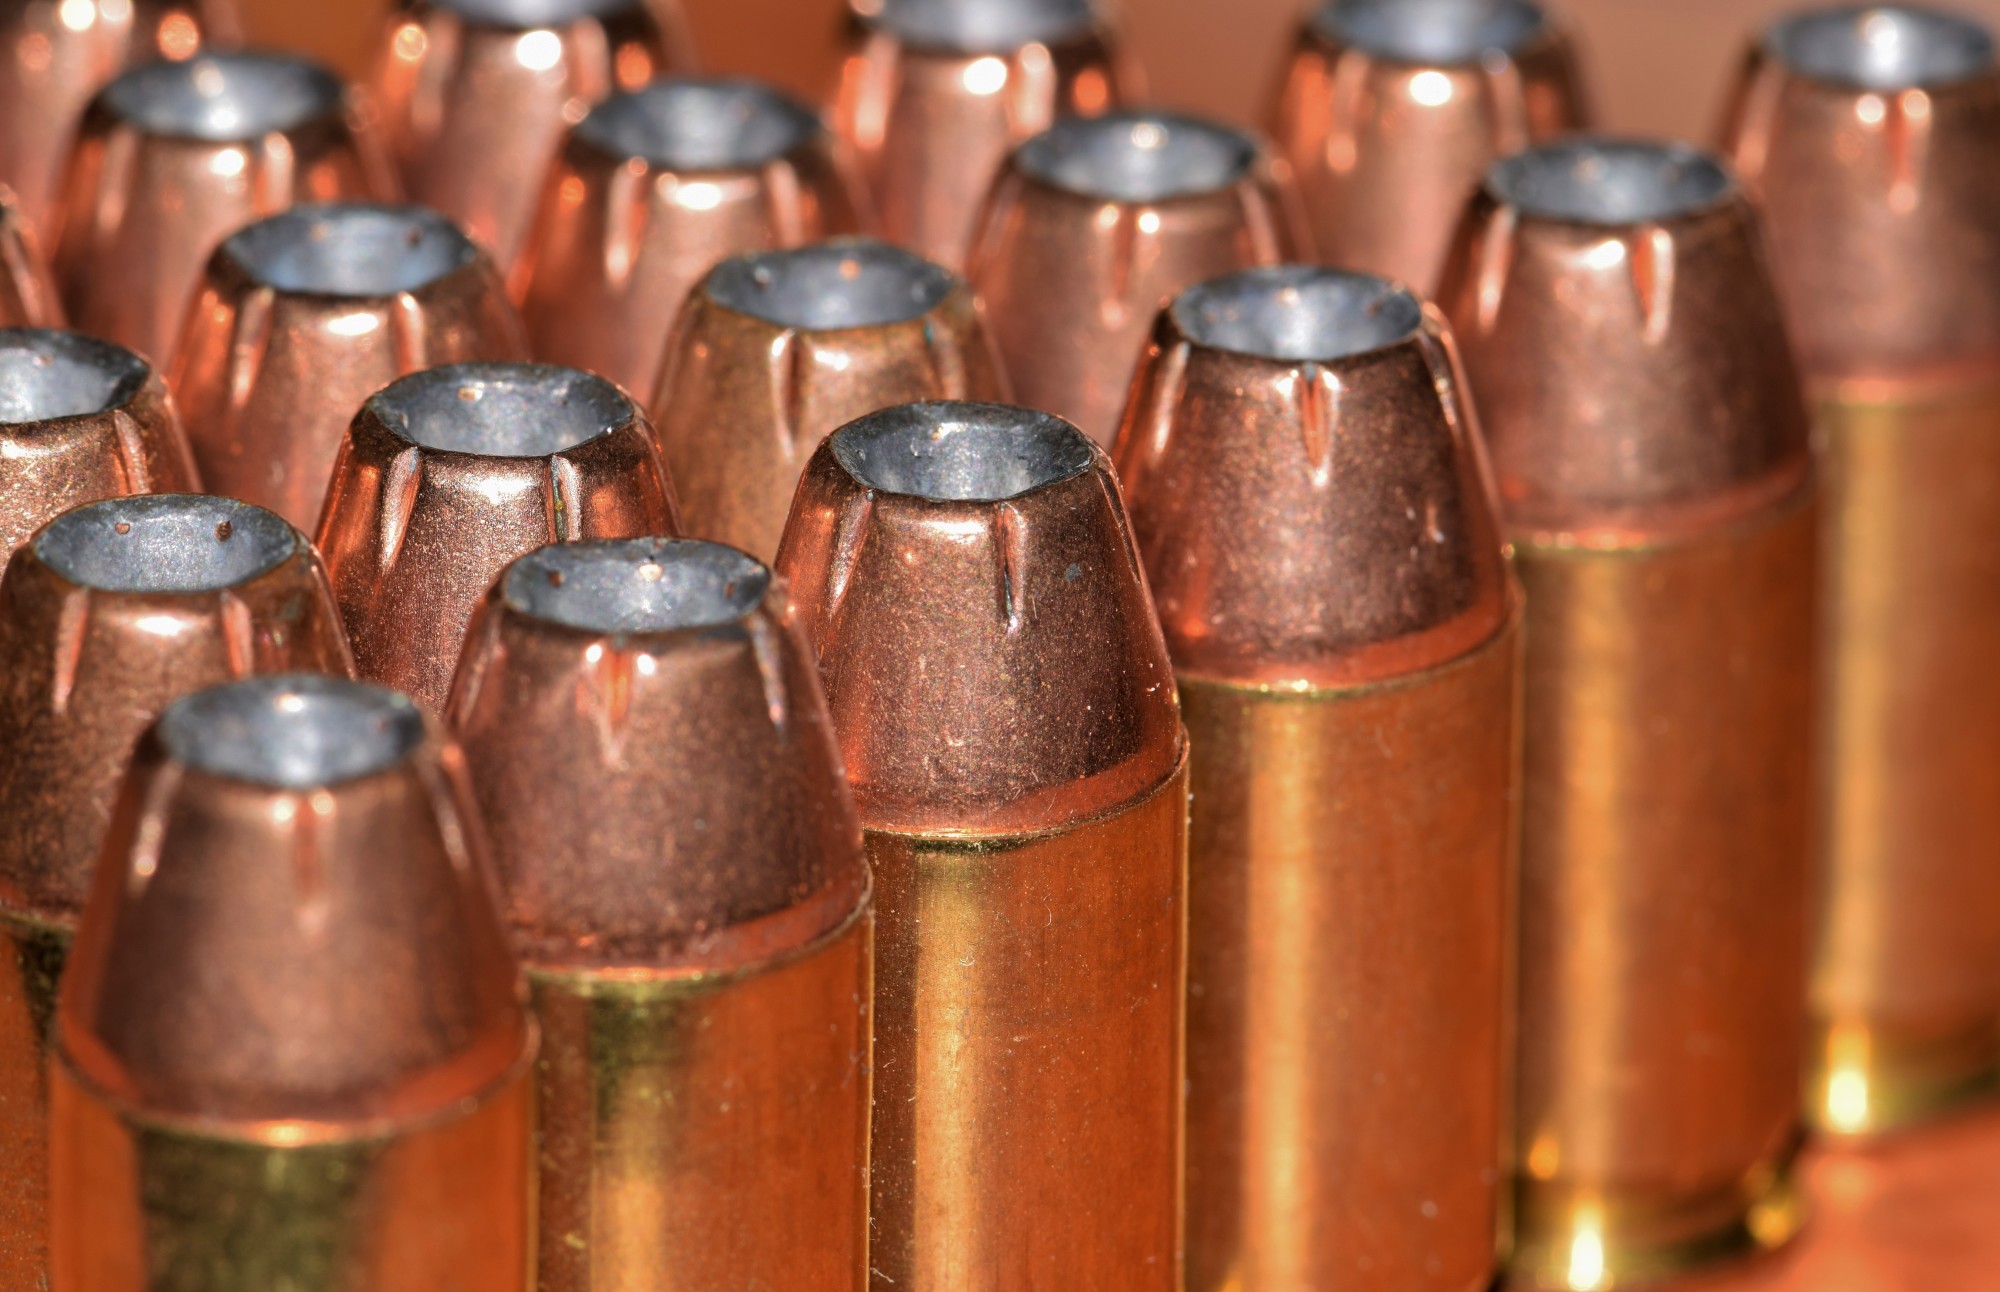 Building Your Stockpile: All About Ammo Storage - BulkMunitions